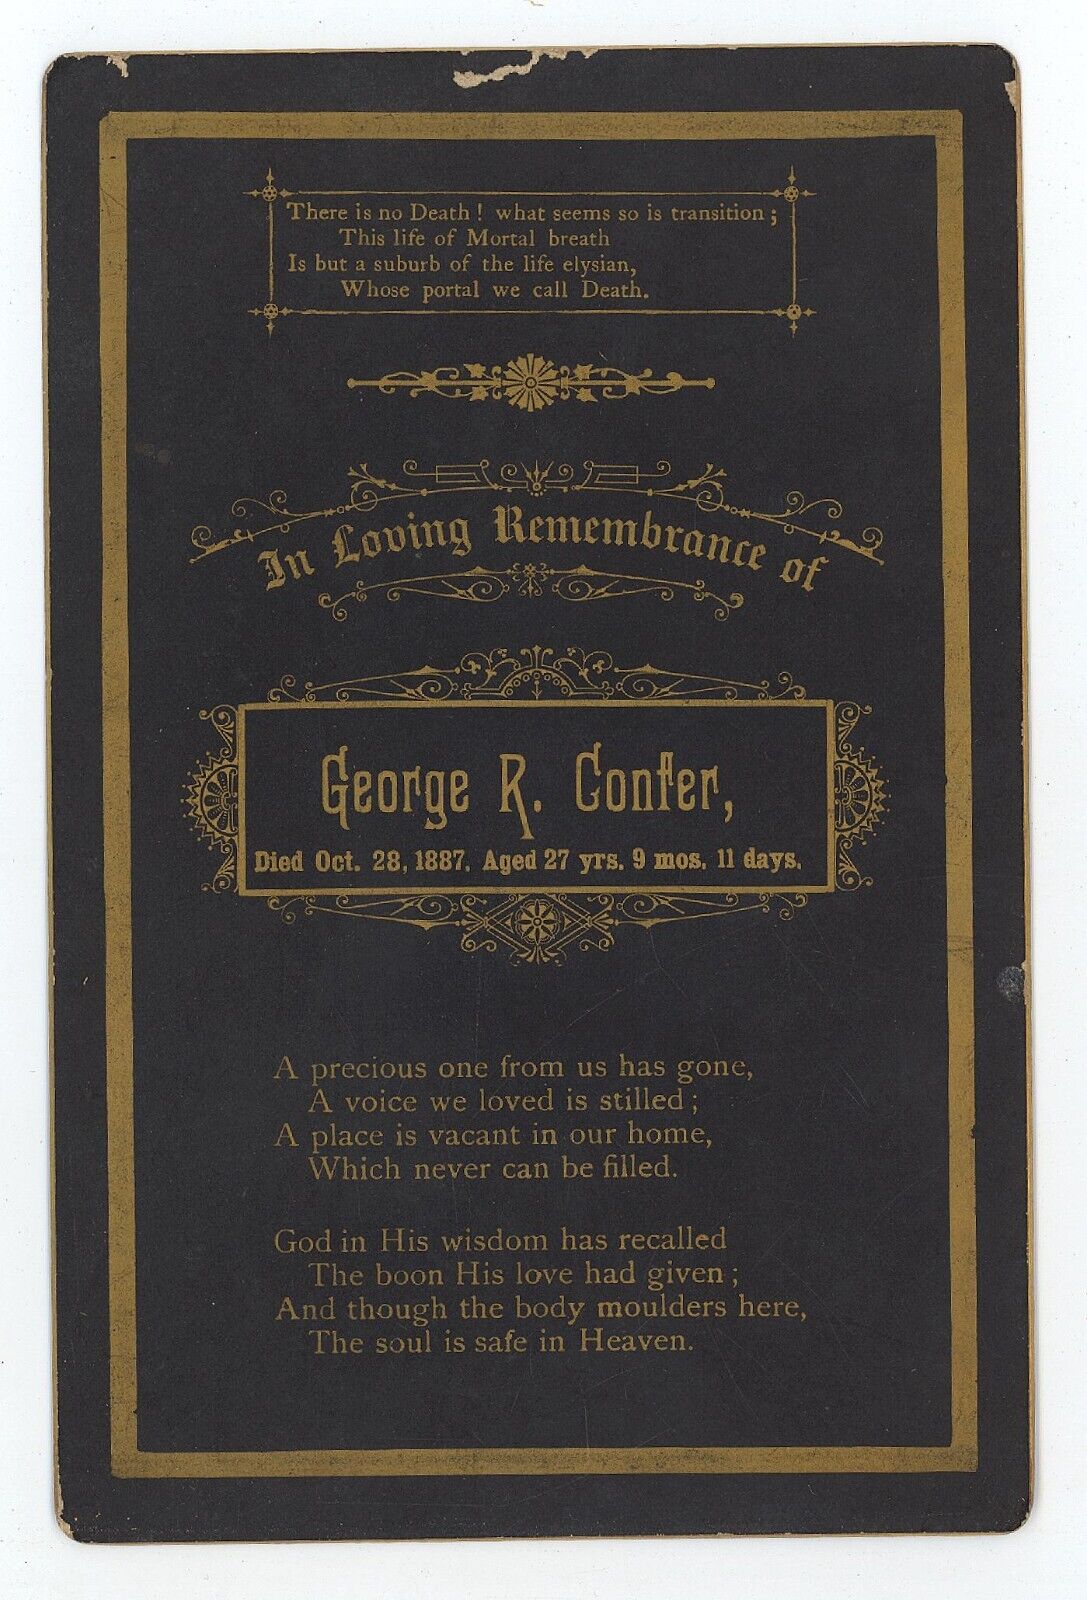 Antique Circa 1880s Two Remembrance Cabinet Cards For George B. Confer 27 yrs